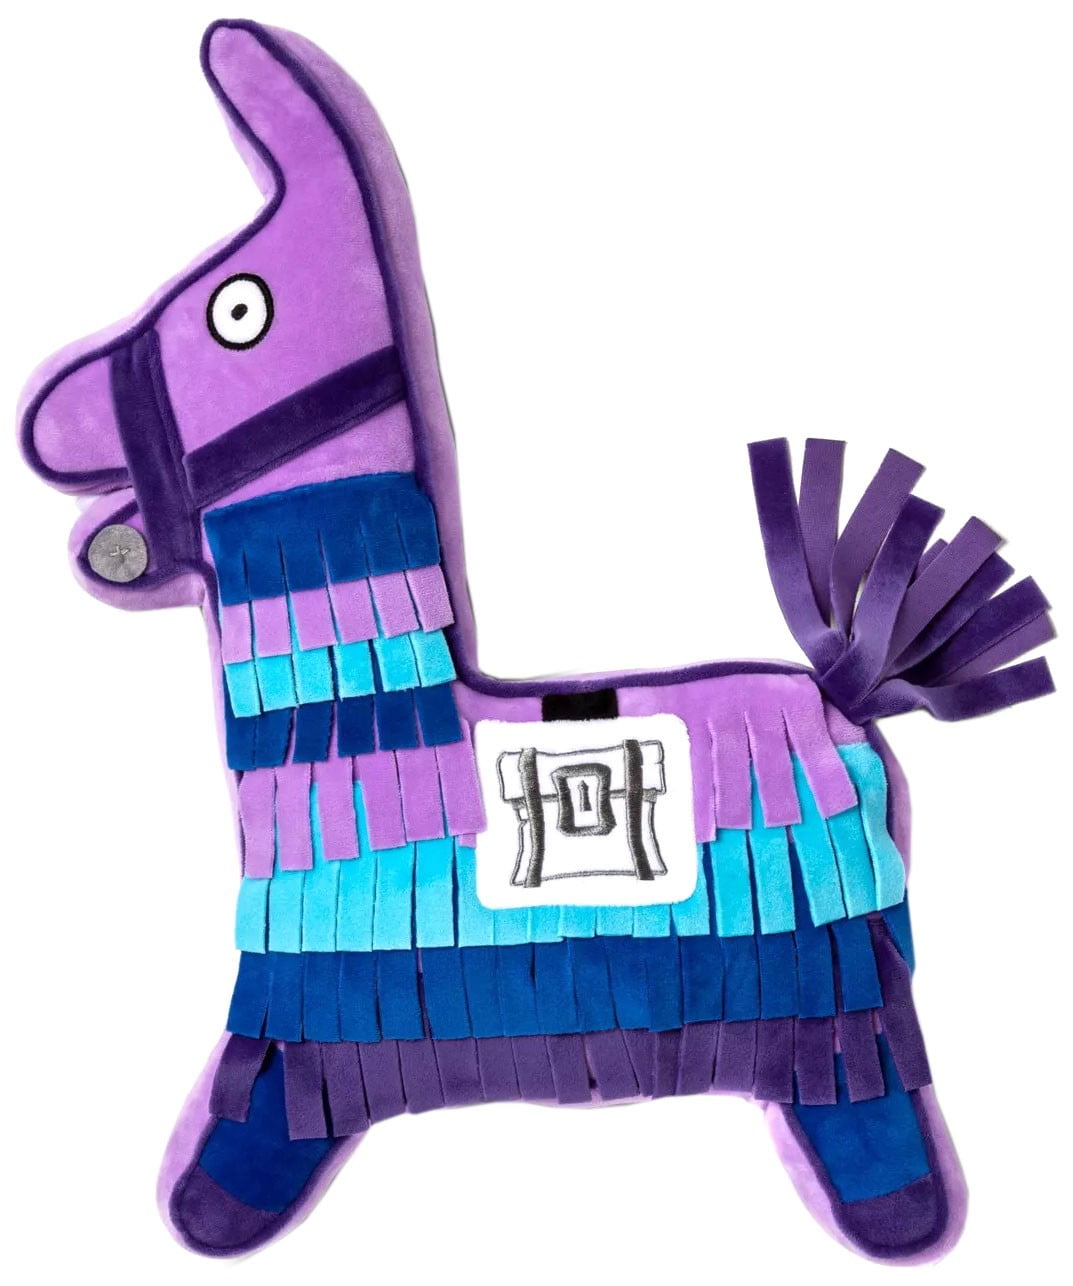 Officially Licensed Llama Plush Loot Classic Blue Design Character World Official Fortnite Shaped Llama Cushion Pillow 